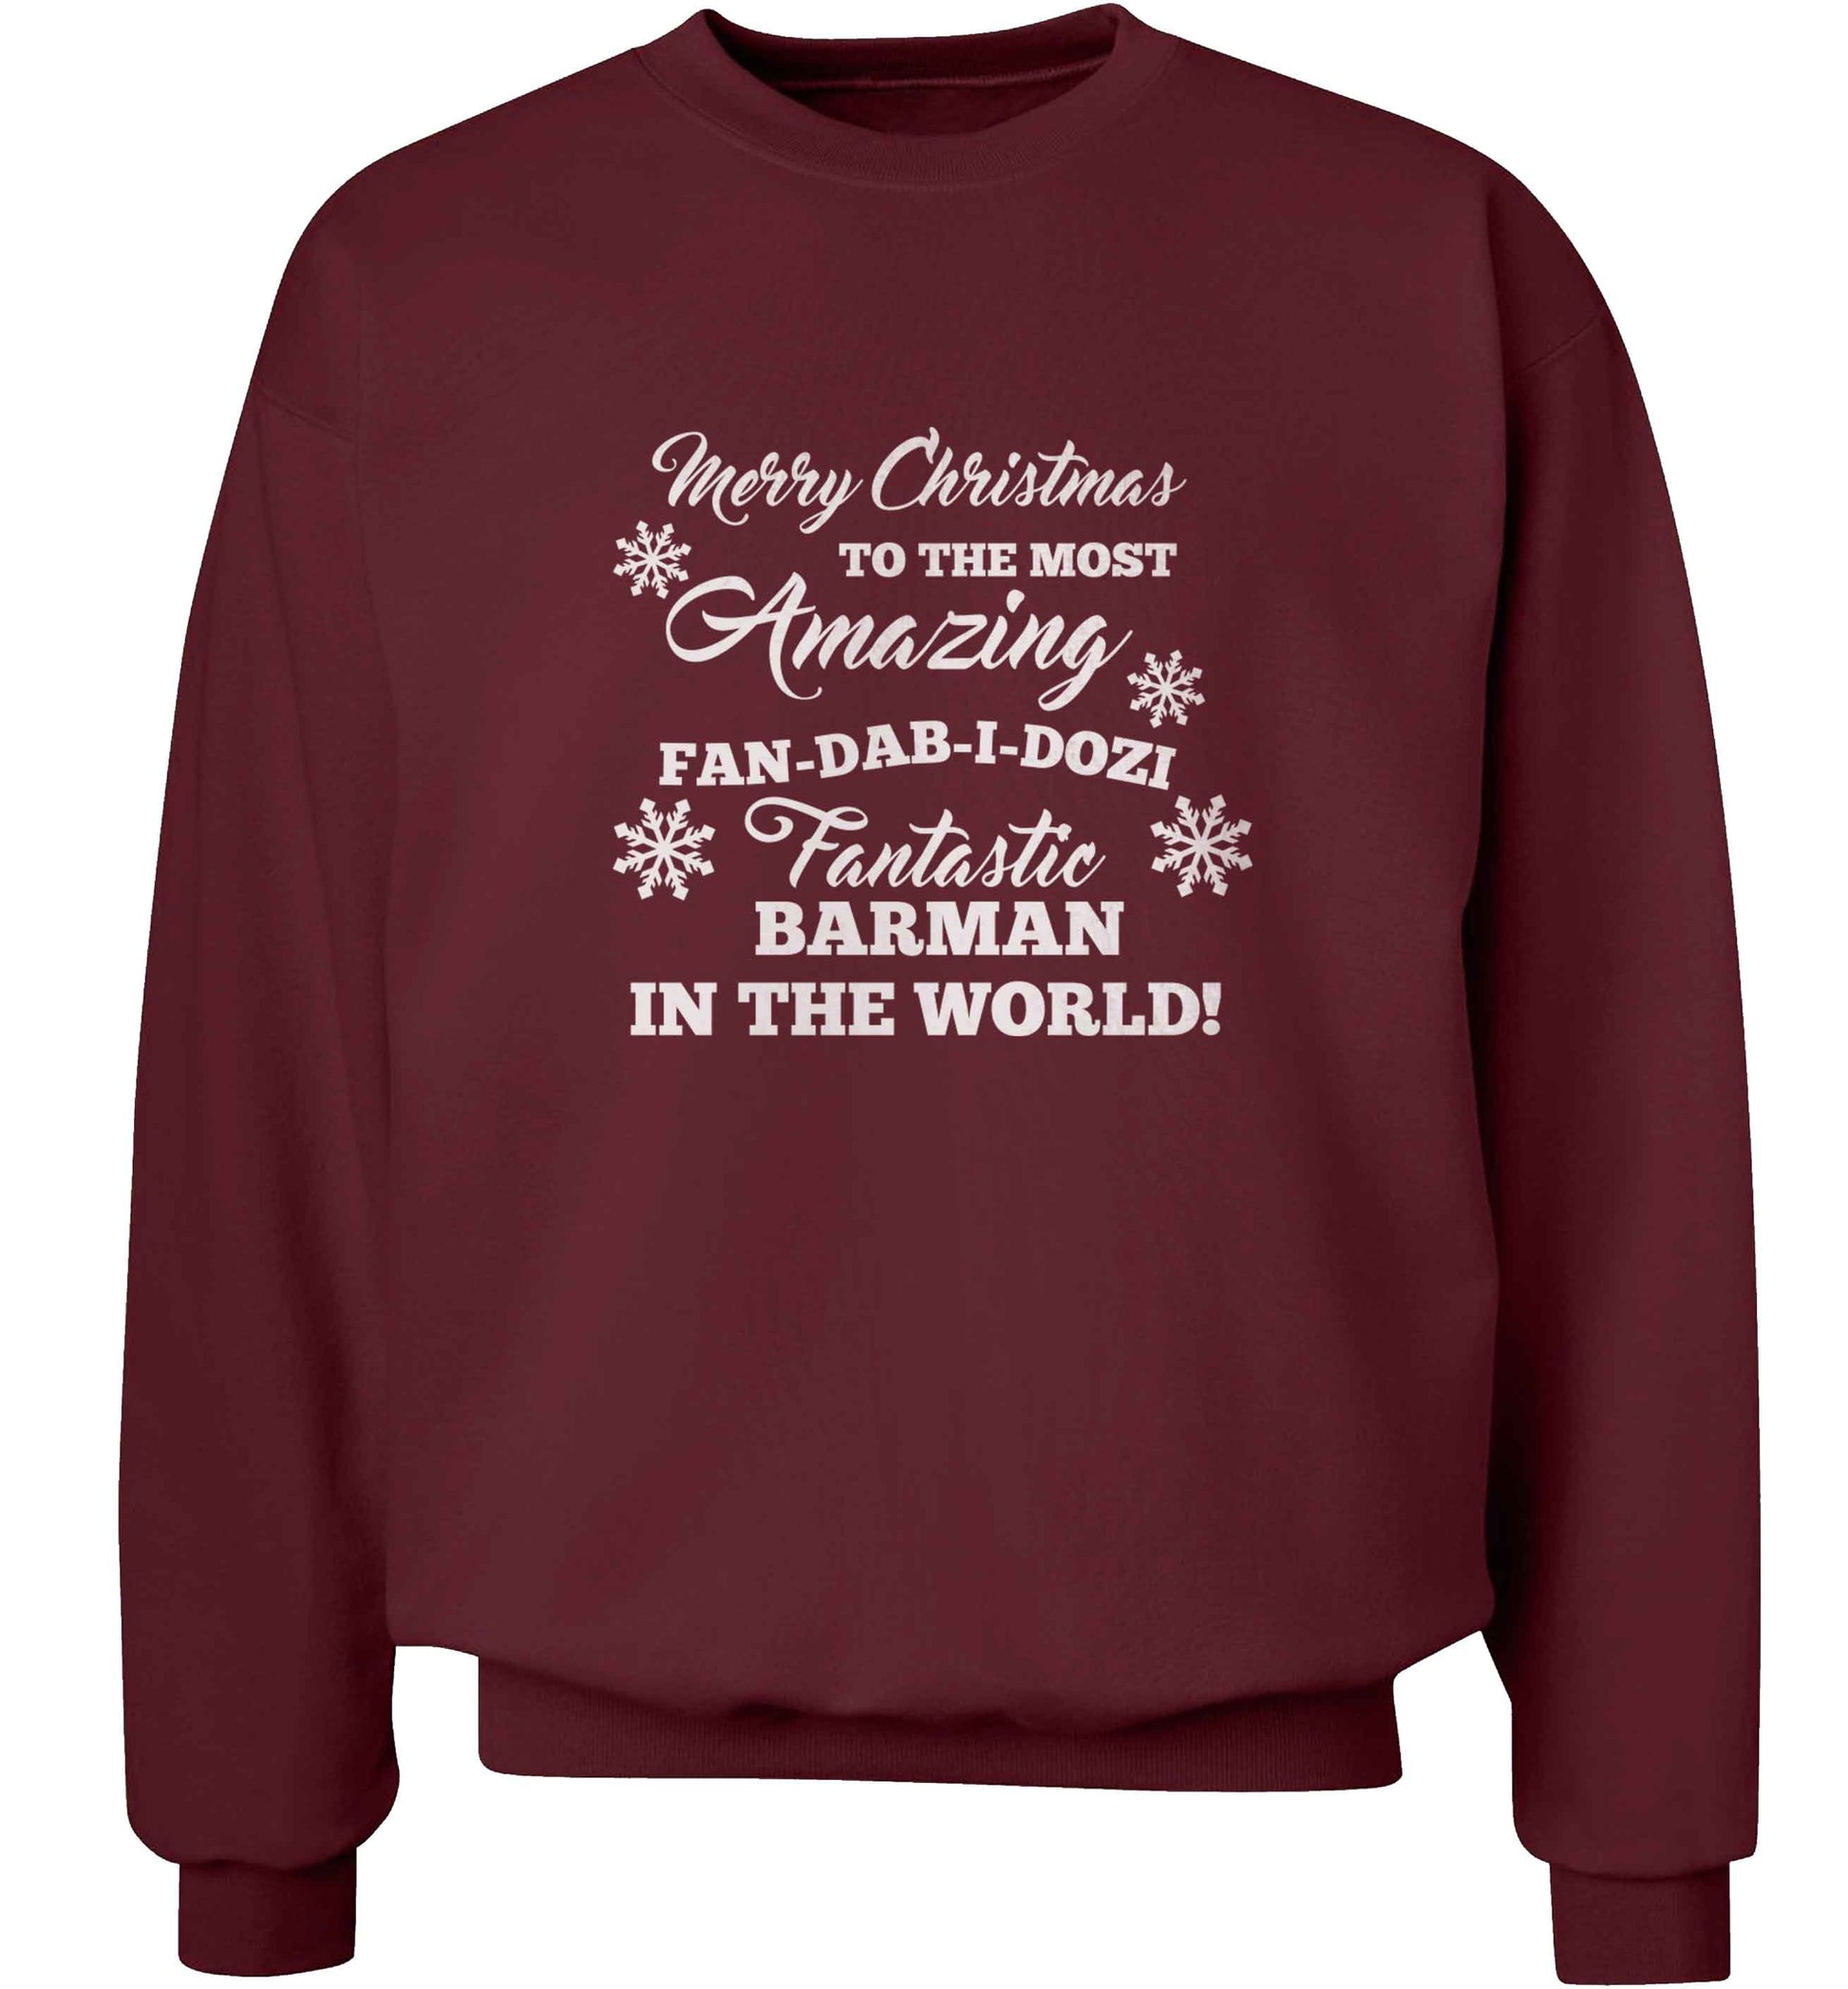 Merry Christmas to the most amazing barman in the world! adult's unisex maroon sweater 2XL